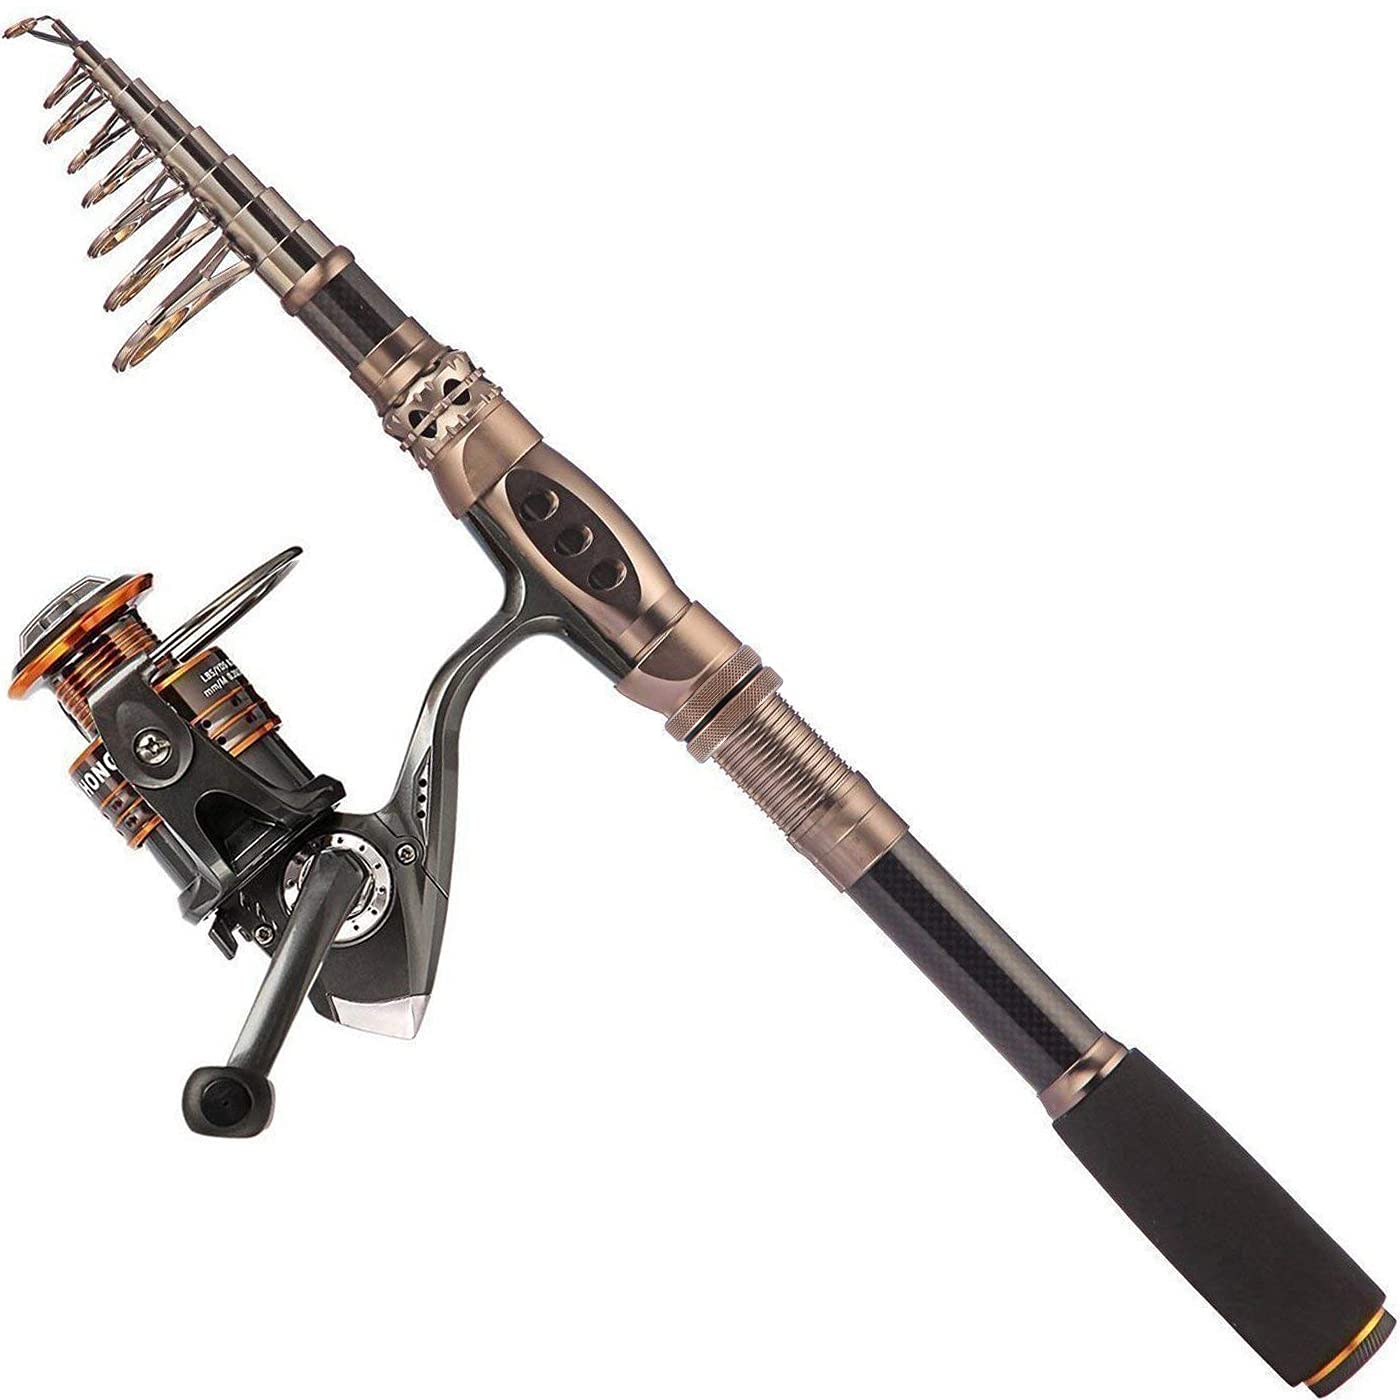 PLUSINNO Fly Fishing Rod and Reel Combo, 4 Piece Fly Fishing